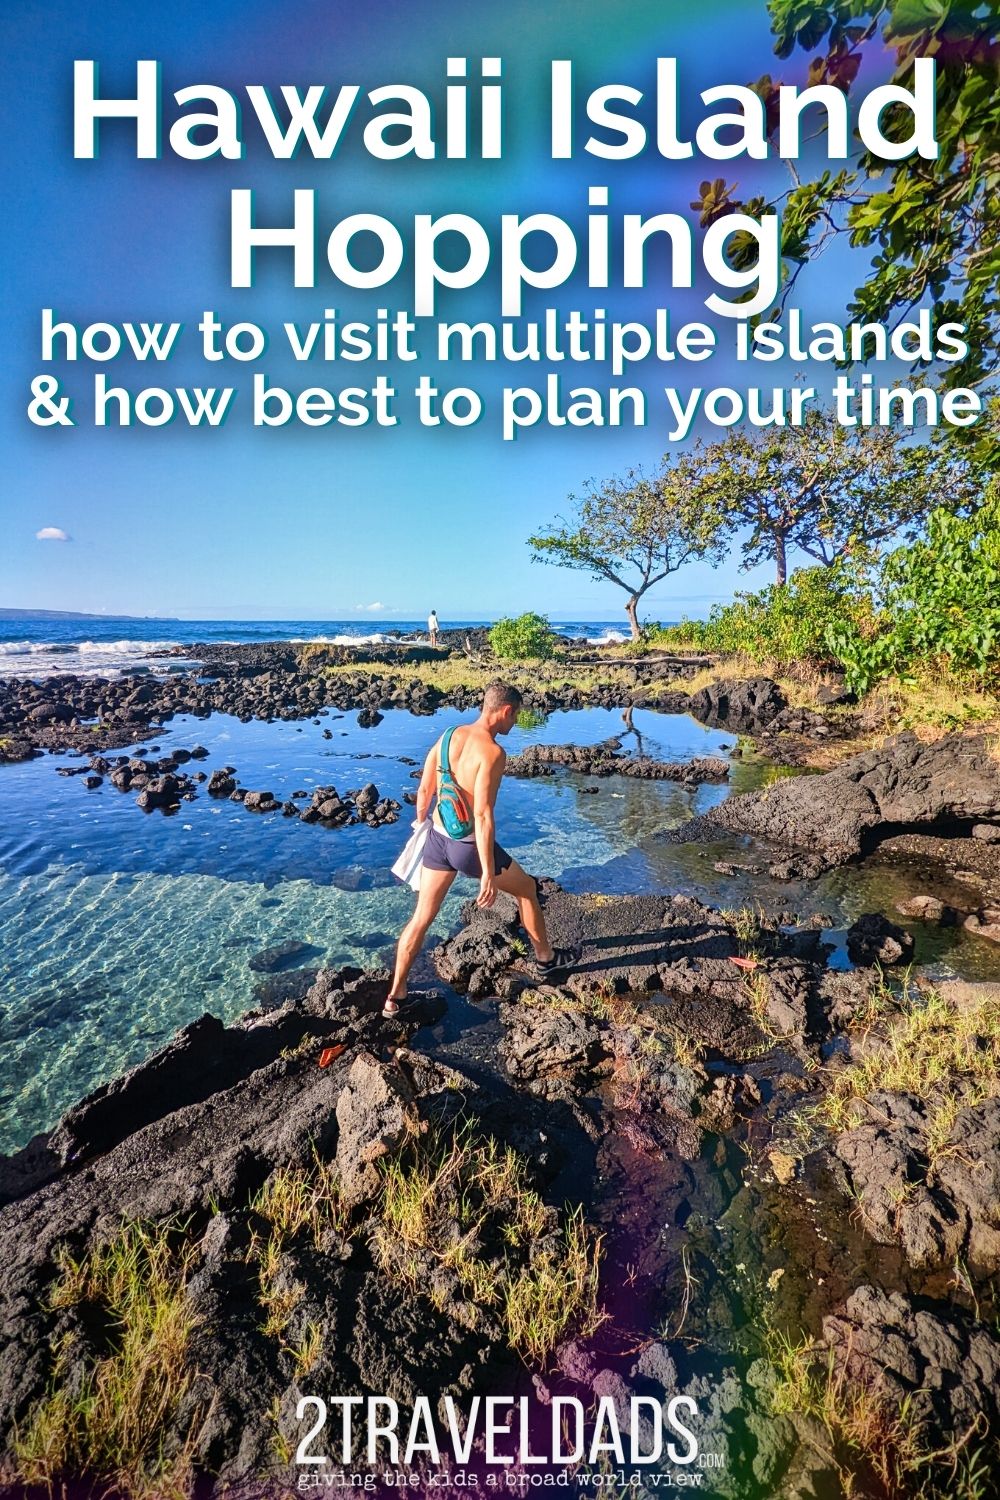 Hawaii island hopping is a complex but wonderful way to experience multiple Hawaiian Islands. We answer how to travel from island to island, how much time to spend on each, and our favorite must-do activities across Hawaii.